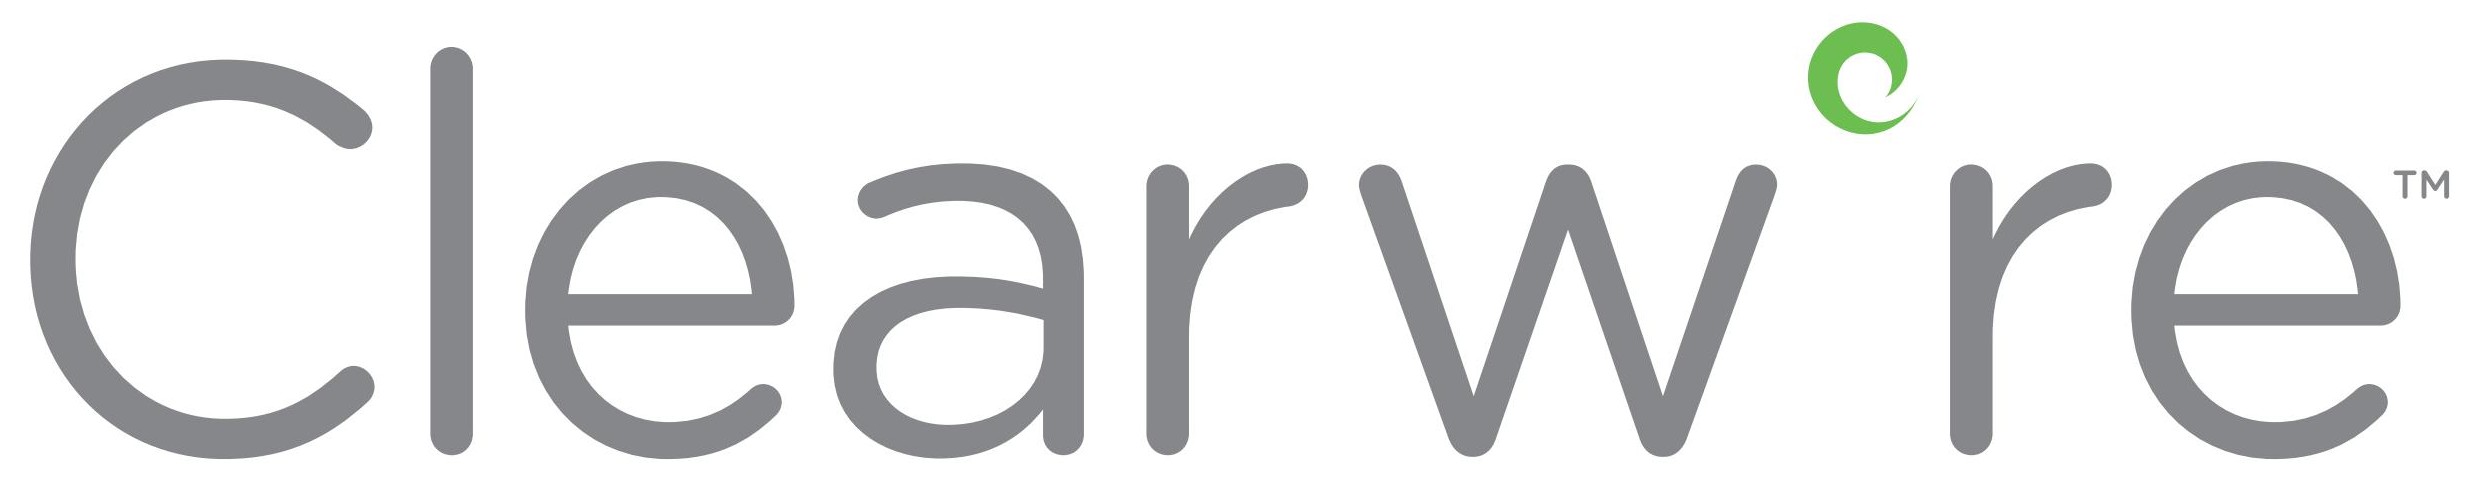 Clearwire Logo [EPS File]